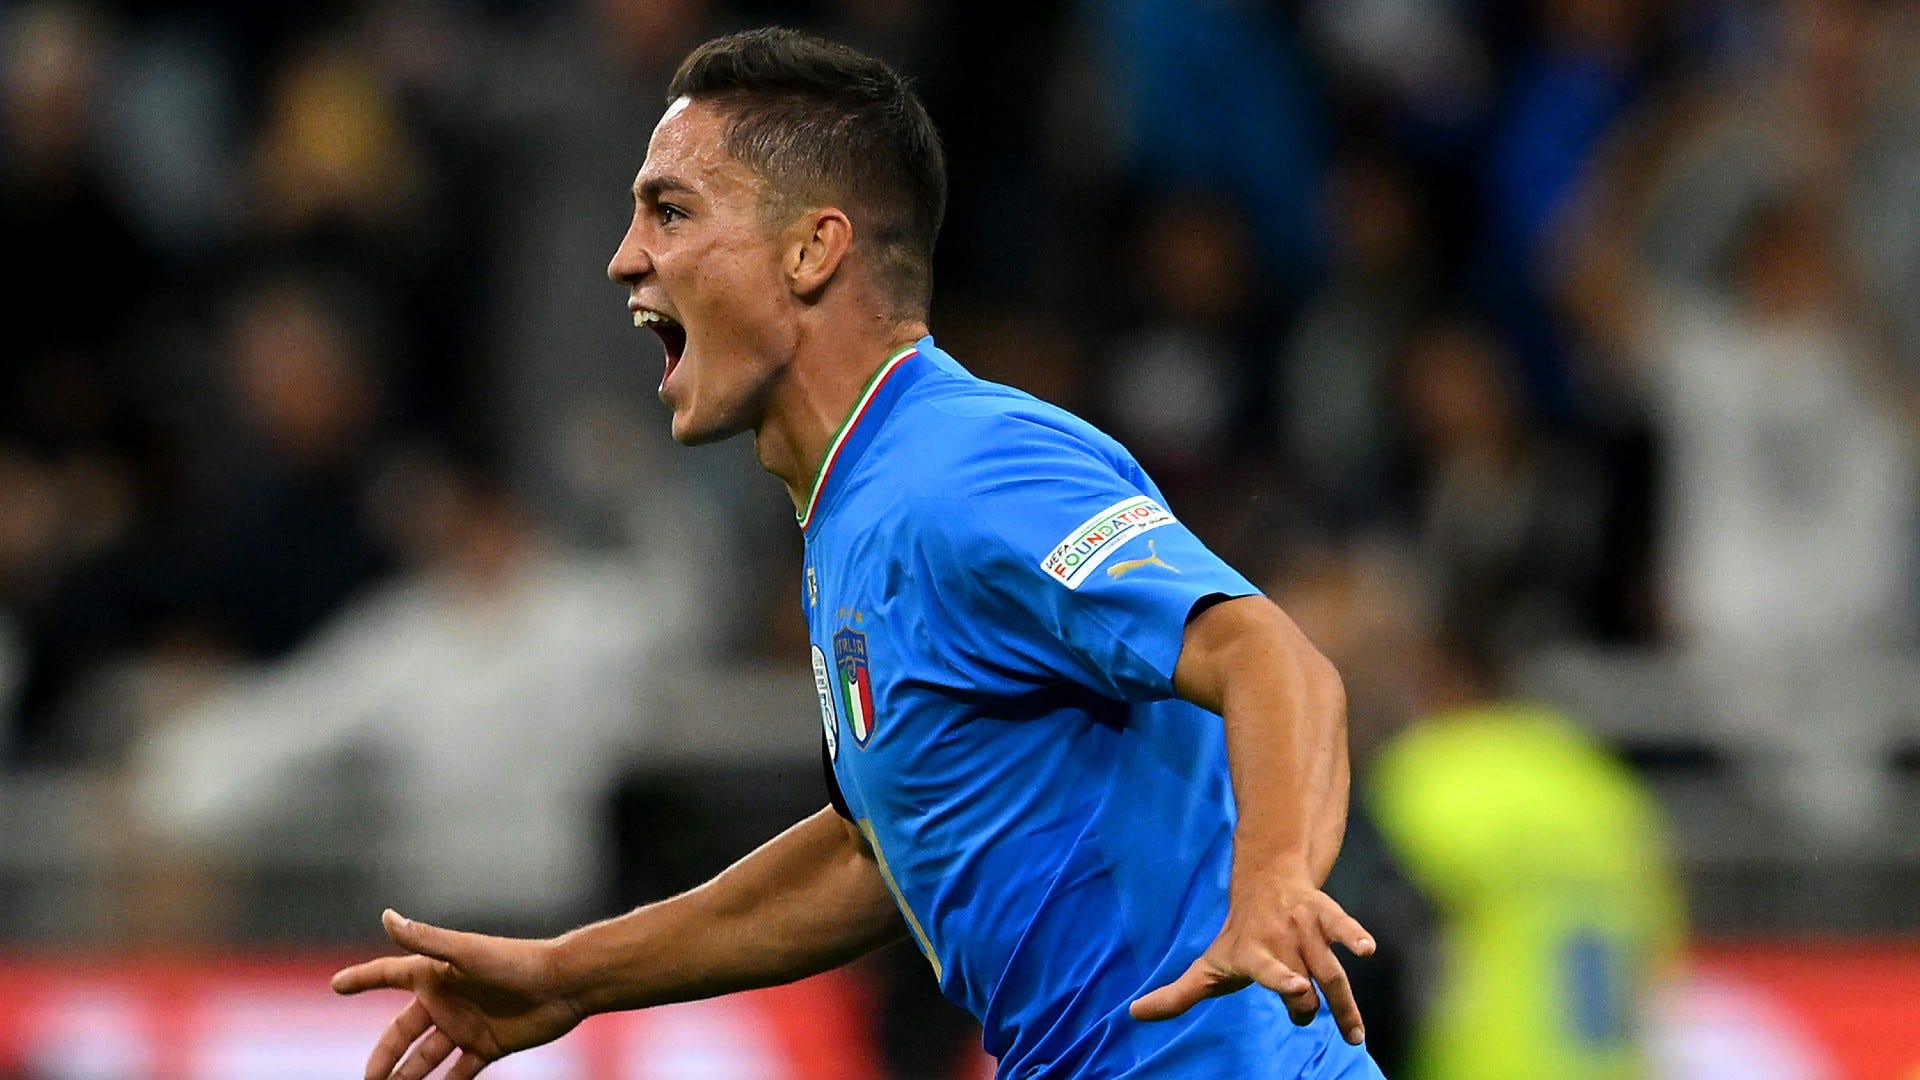 Hungary vs Italy Live stream, TV channel, kick-off time and how to watch Goal